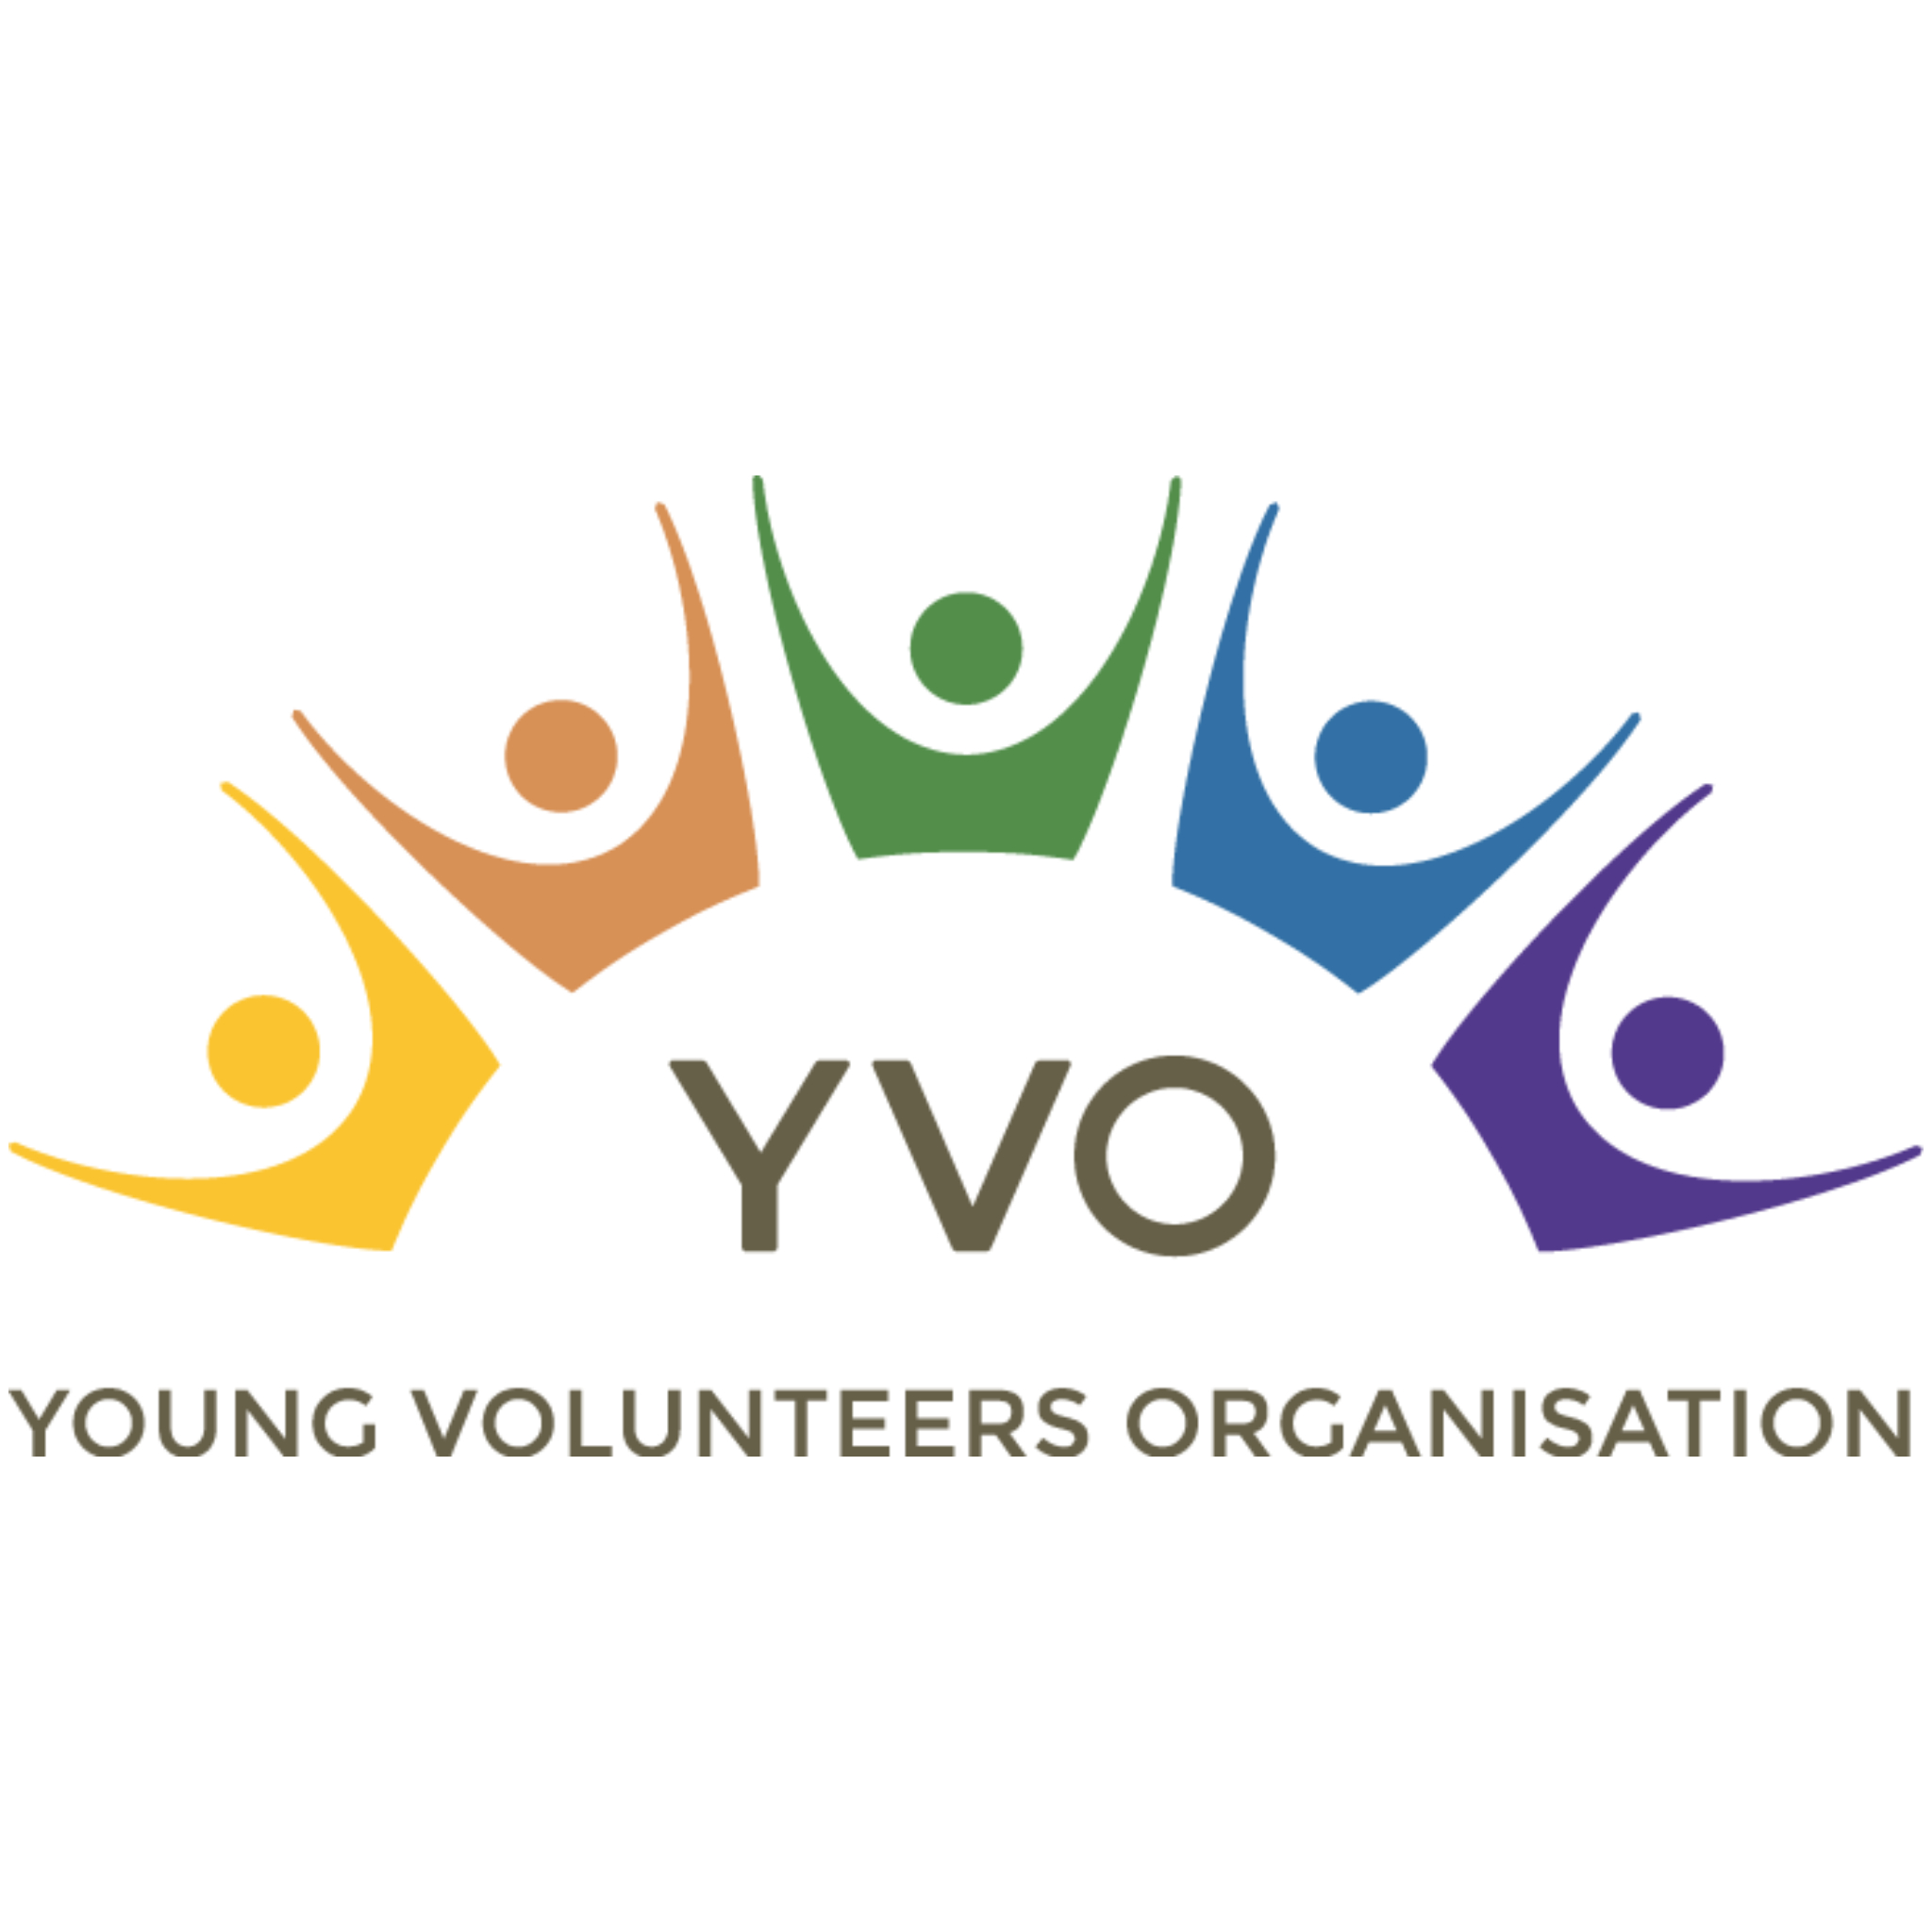 Young Volunteers Organisation (YVO) invites applications from students, youth, startups, and budding social entrepreneurs for a Social Venture Idea Contest!-thumnail